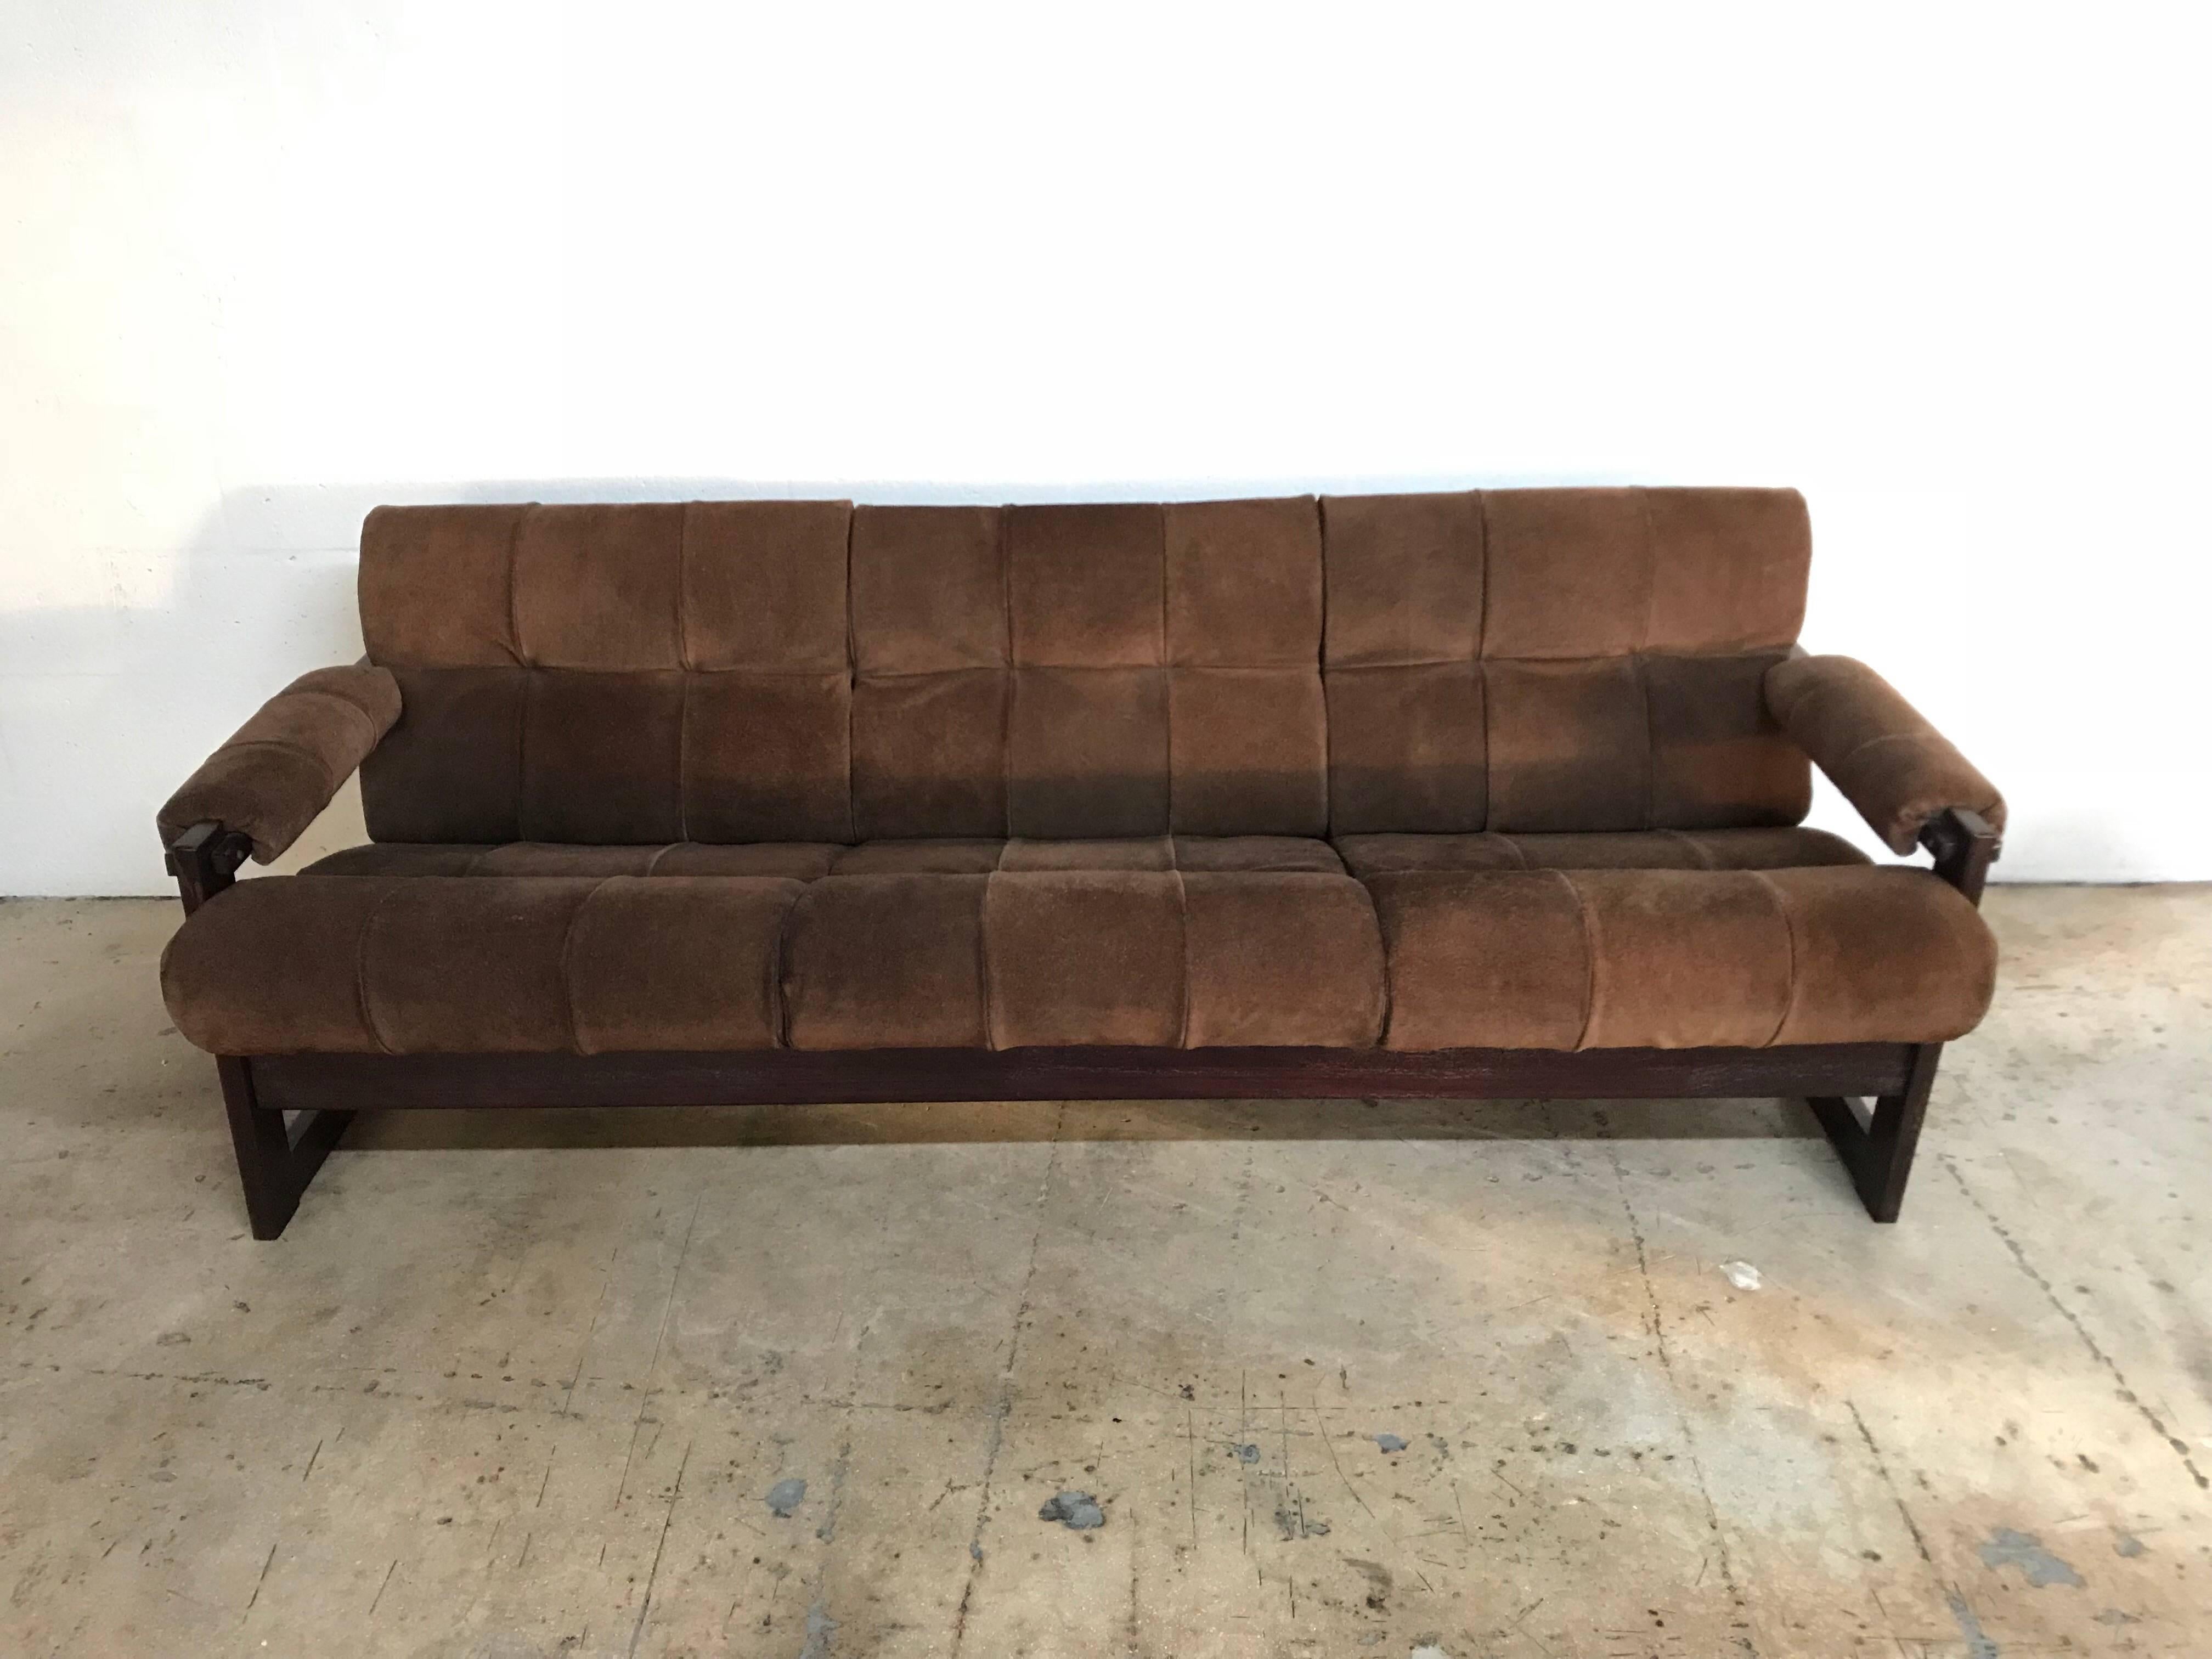 Brazilian rosewood and brown suede sofa designed by Percival Lafer.